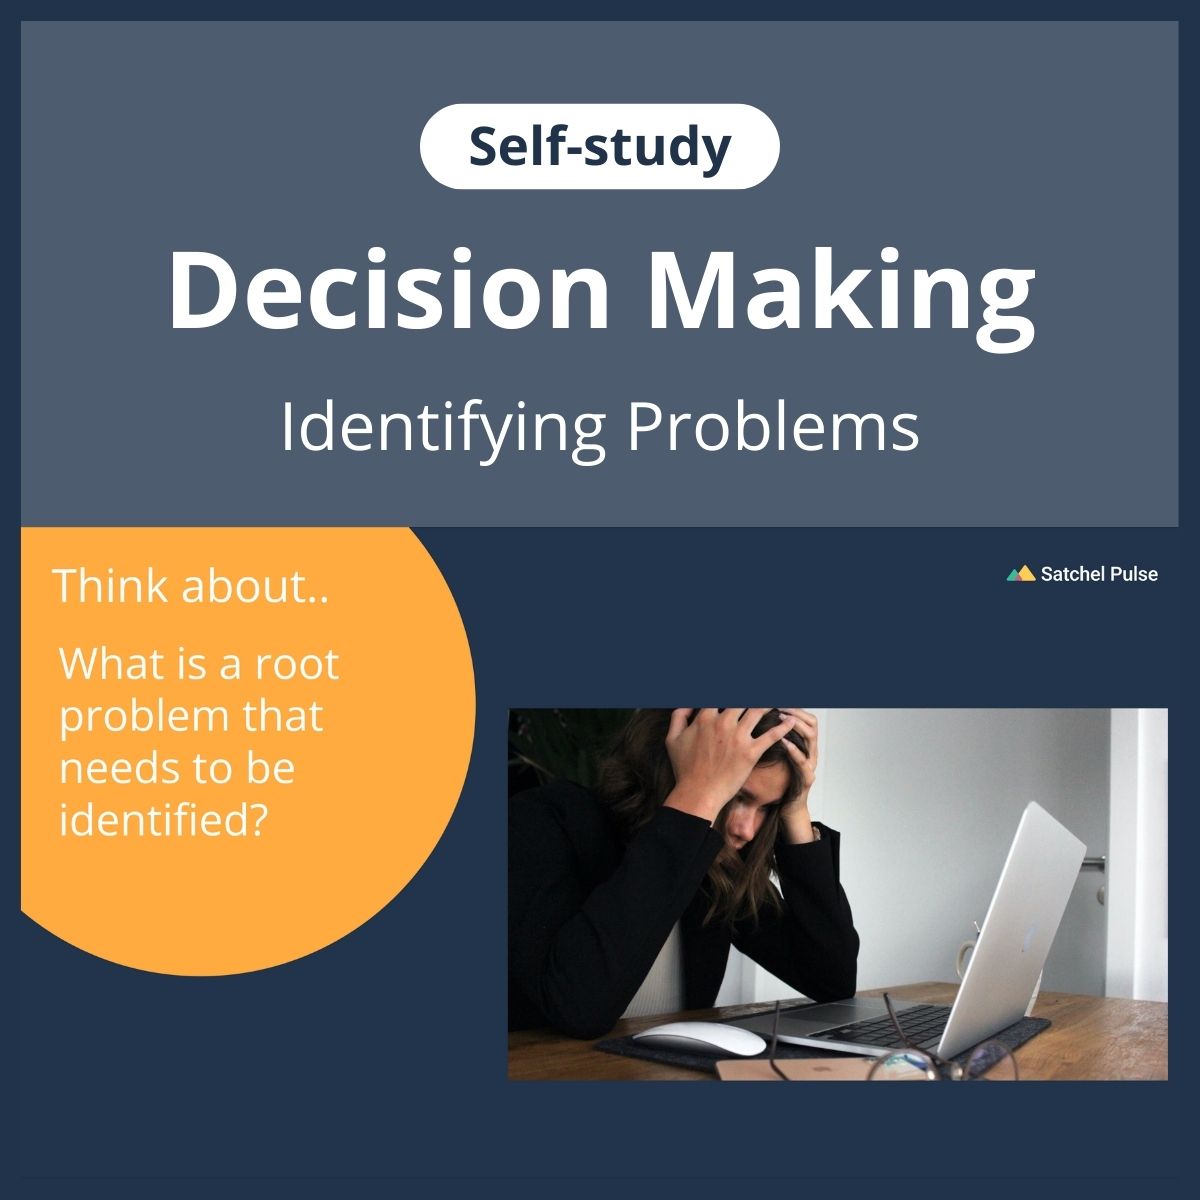 SEL self-study focusing on Identifying Problems to use in your classroom as one of your SEL activities for Responsible Decision-Making